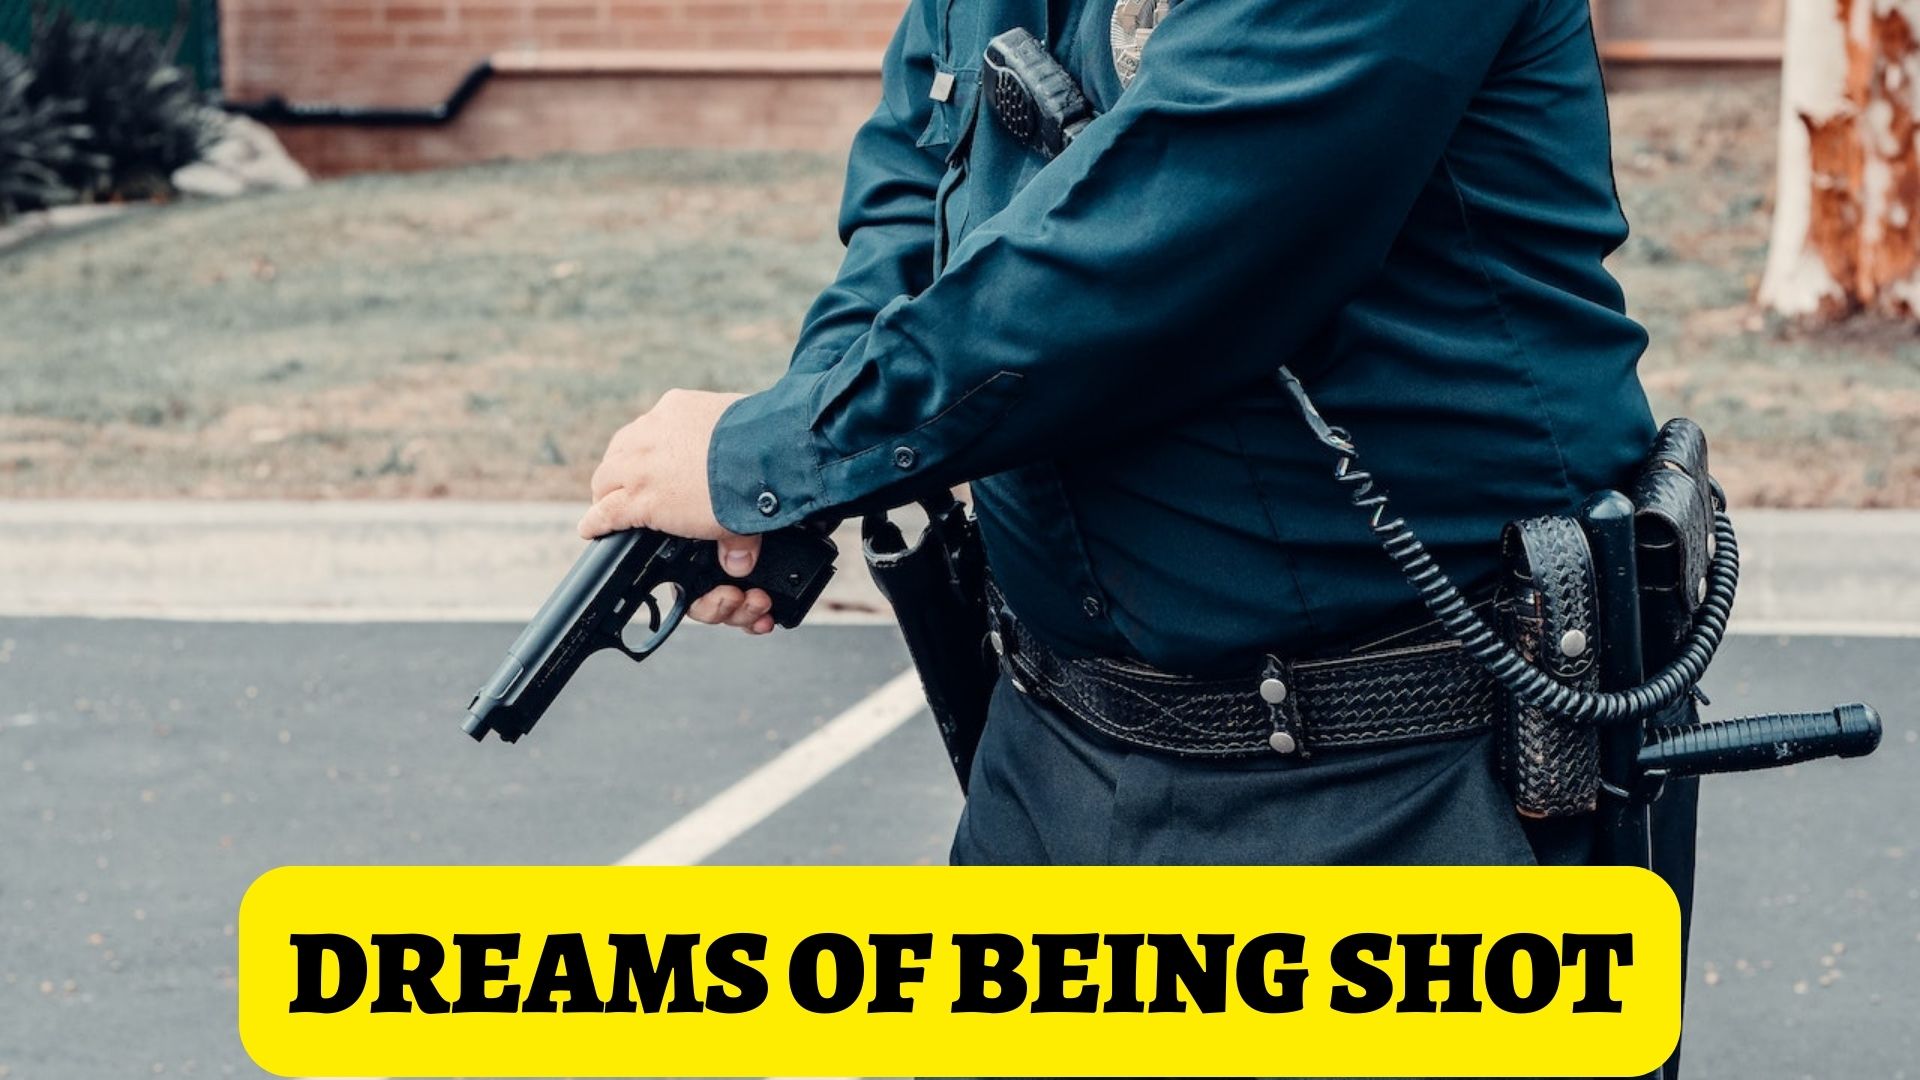 Dreams Of Being Shot - Meaning And Symbolism